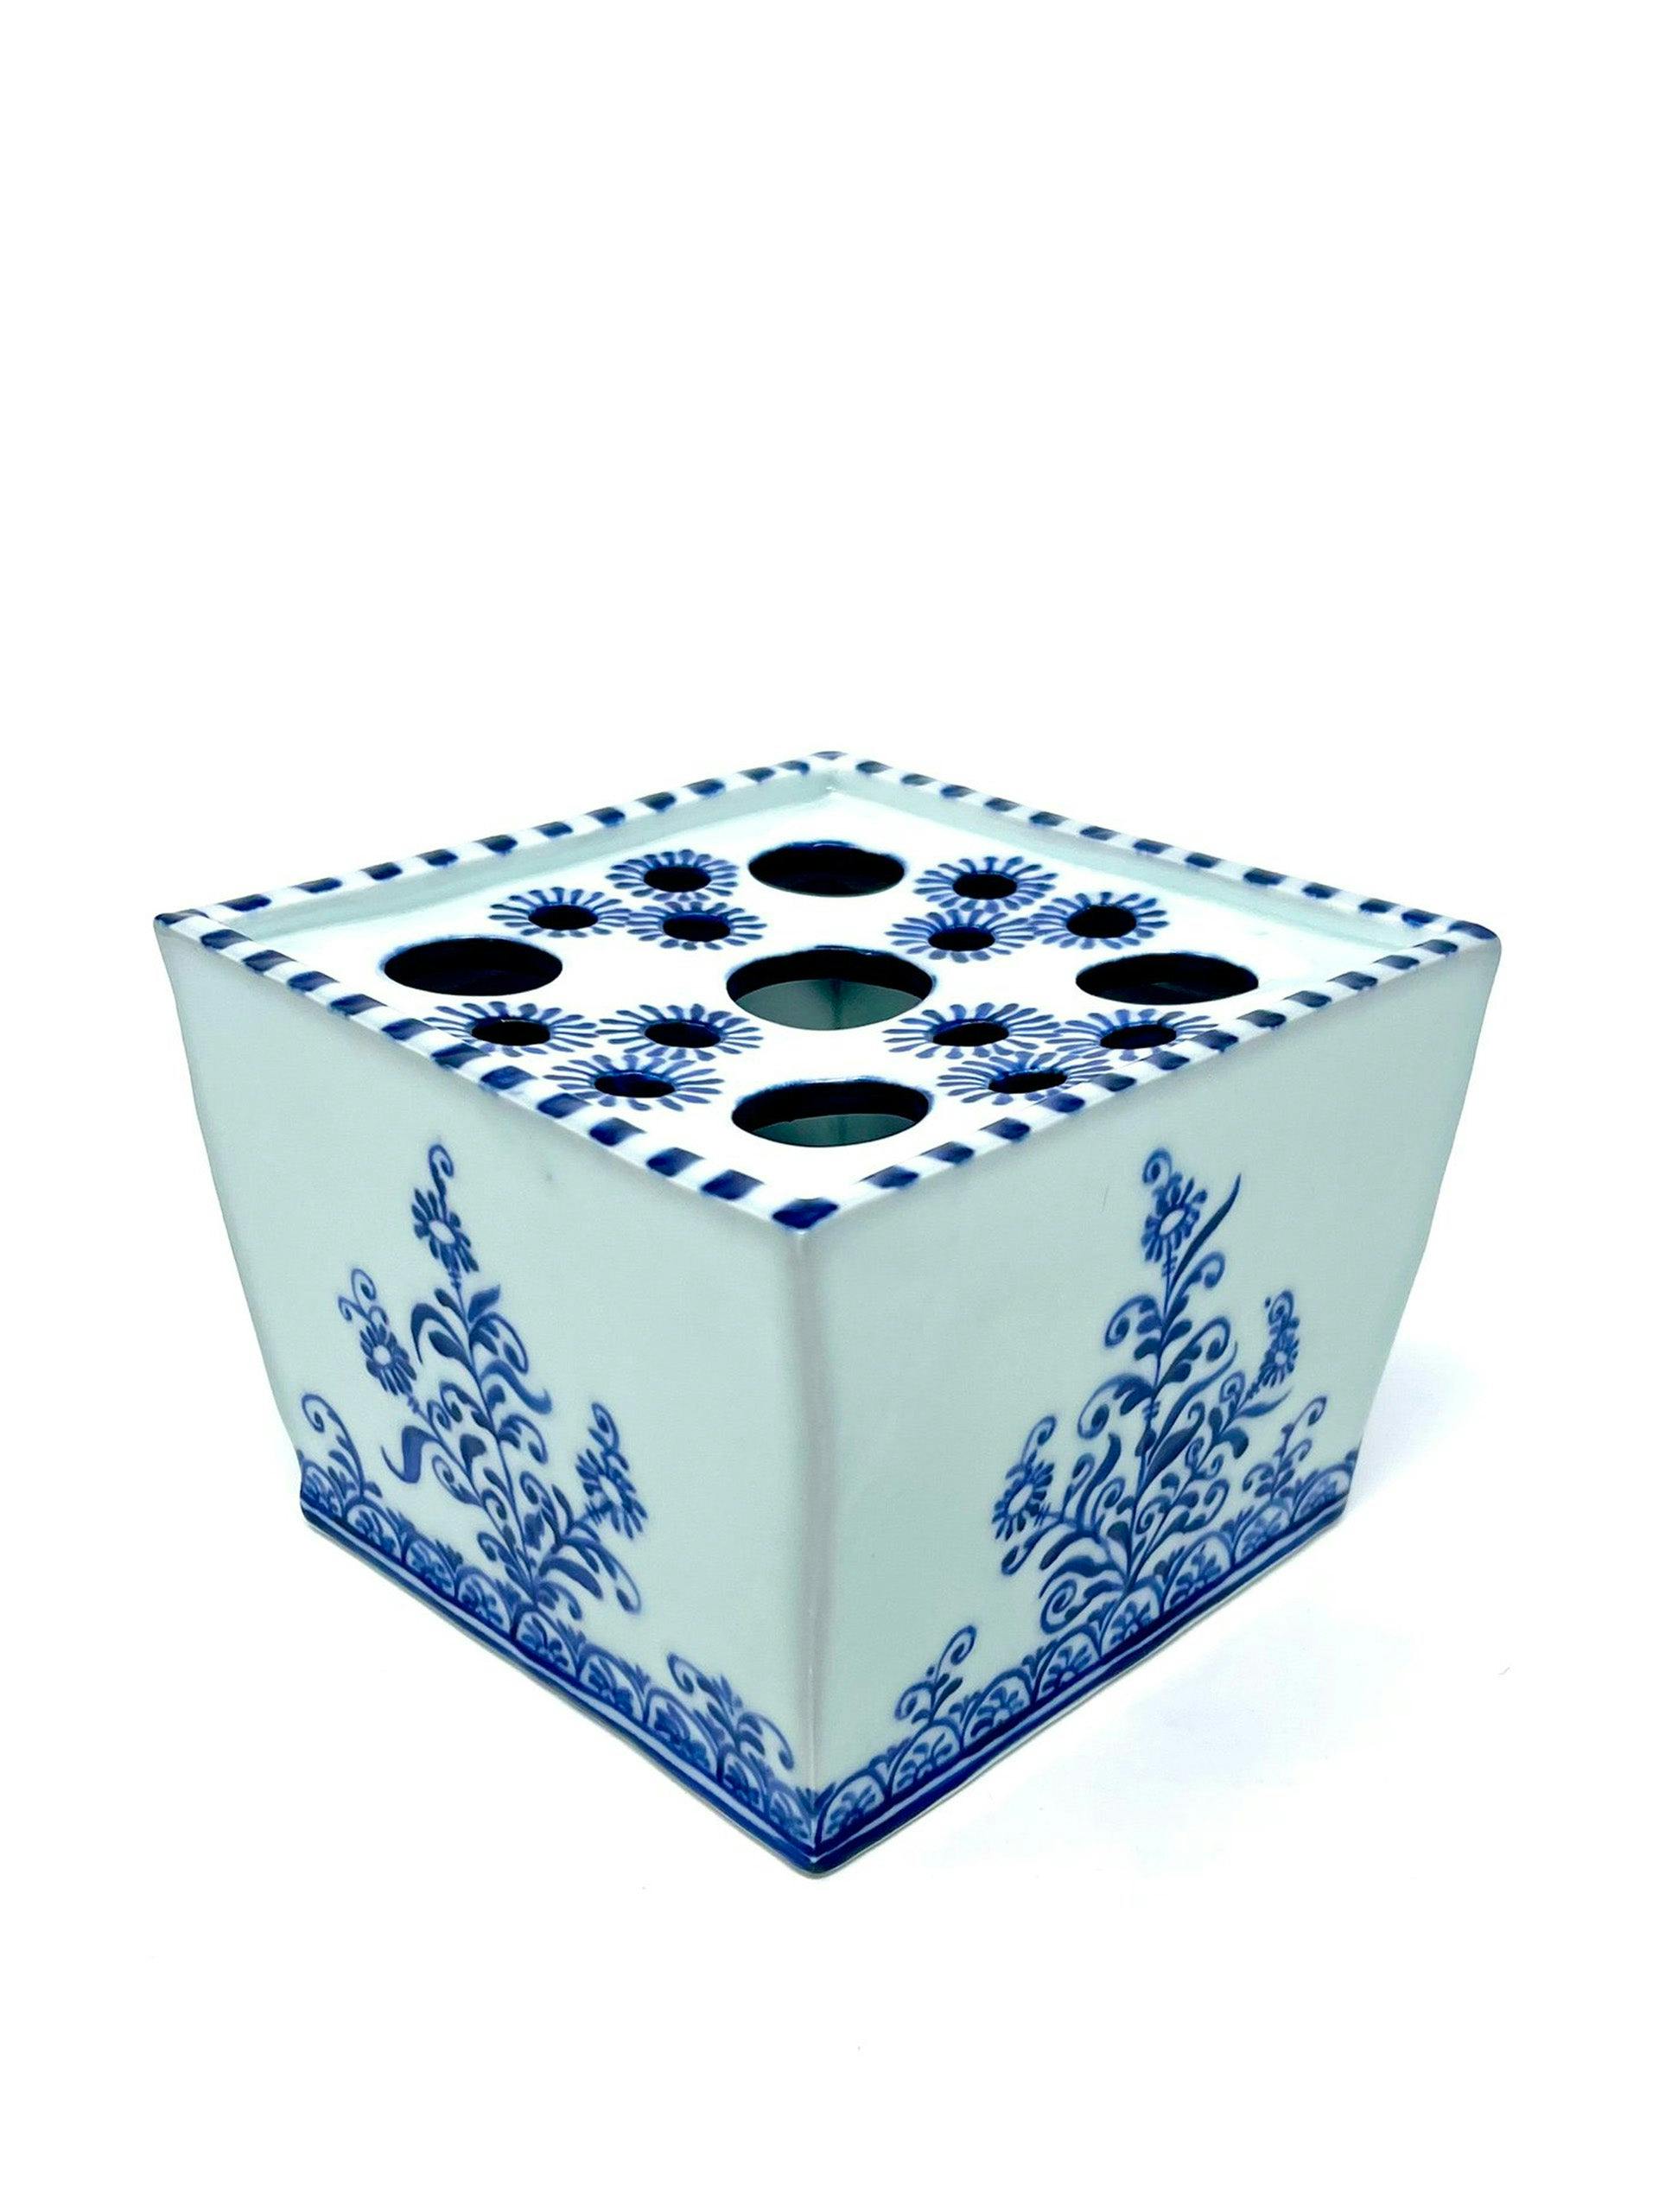 Flower brick with blue flowers and checkered rim